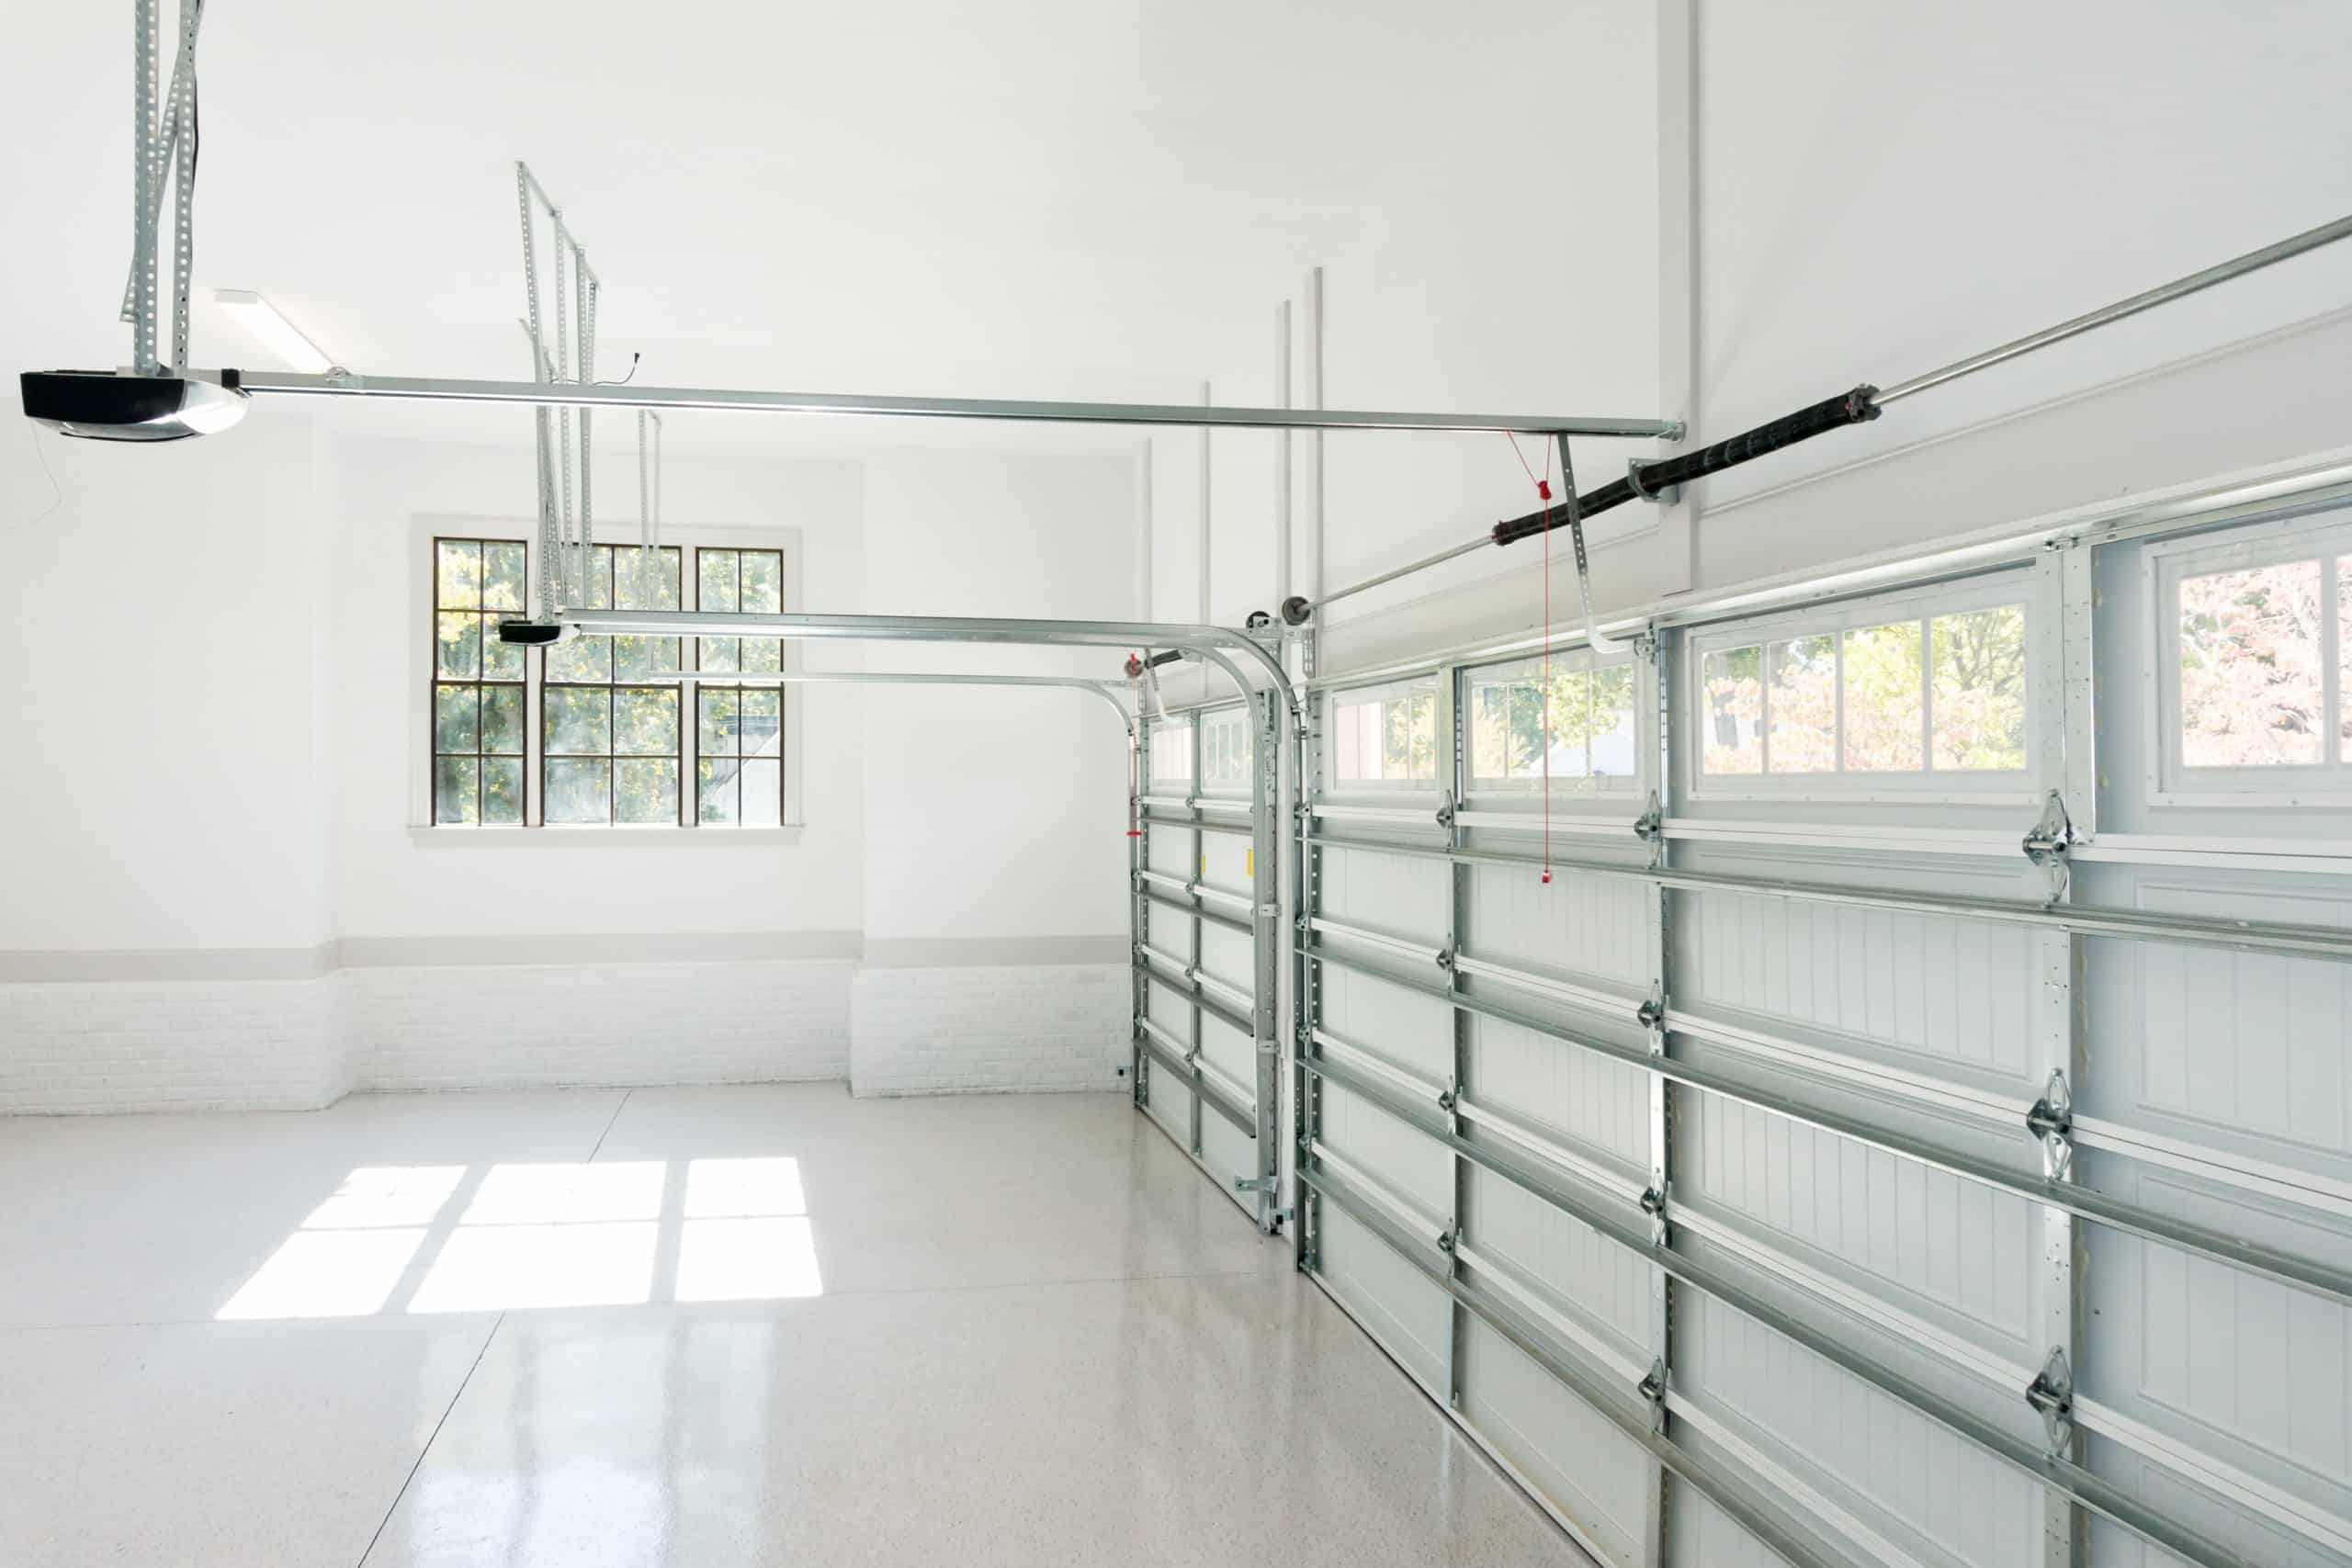 Two garage doors with overhead openers in a clean, white garage.